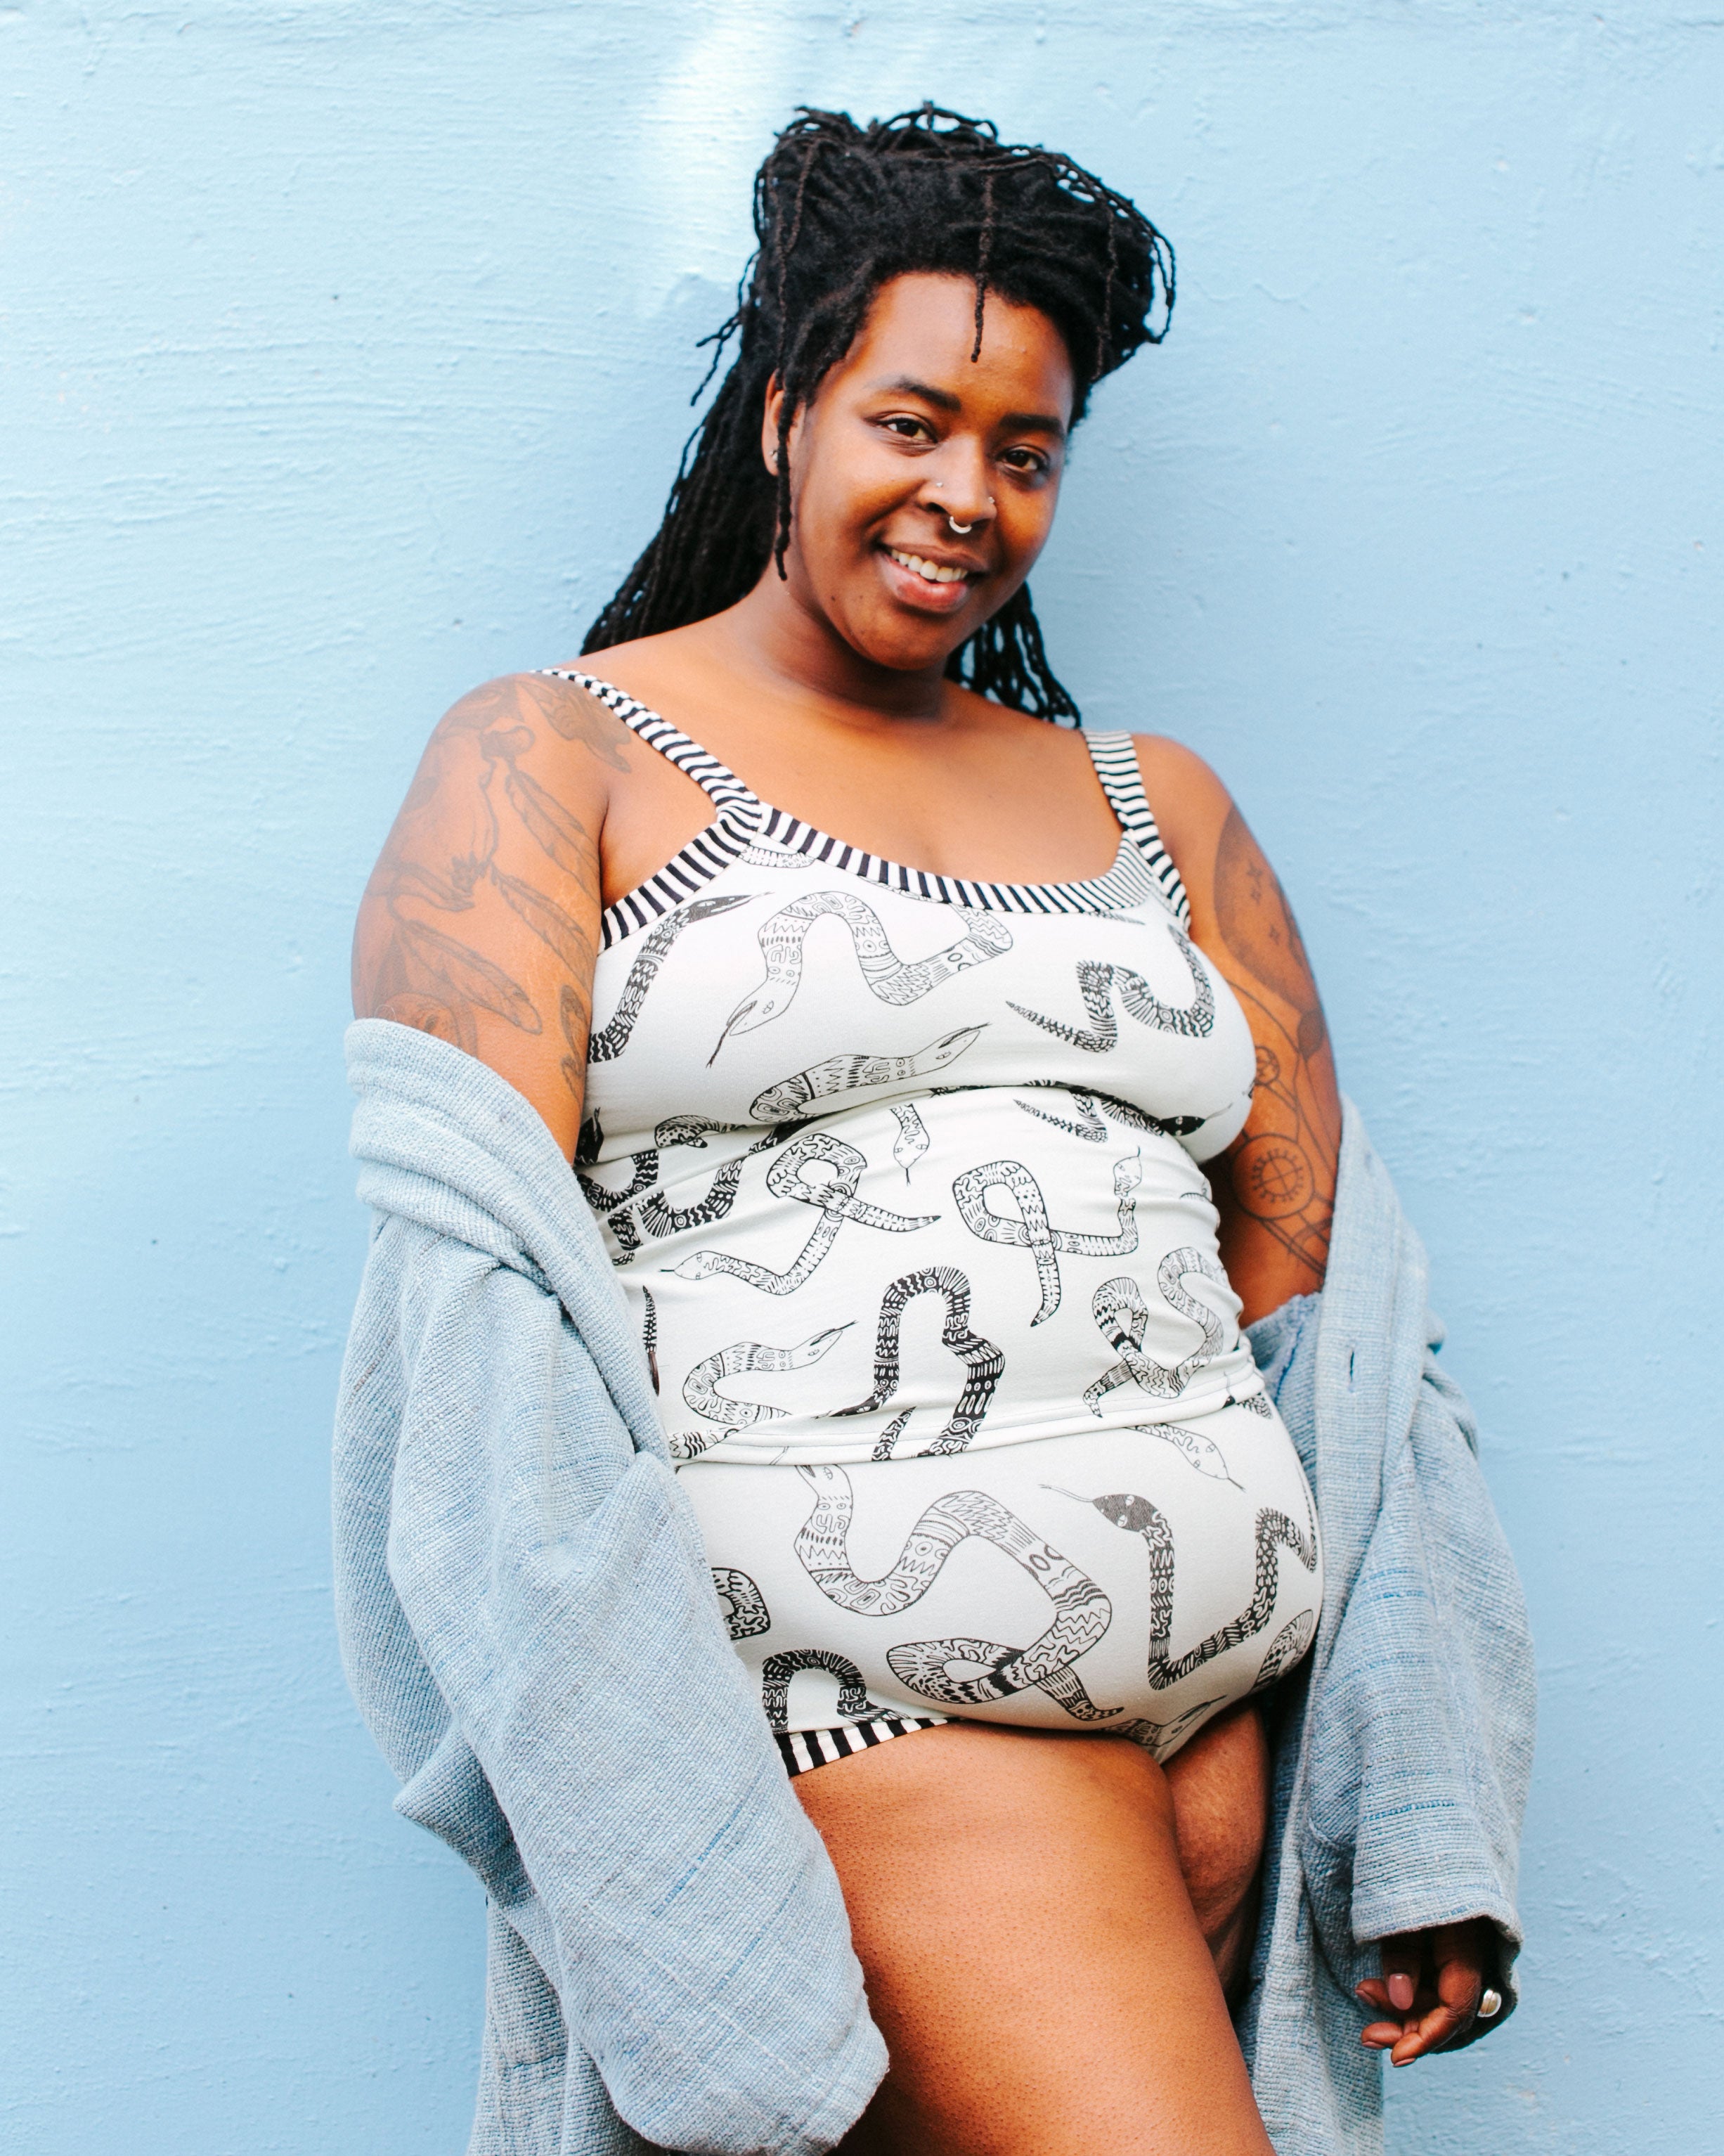 Model smiling at the camera wearing Thunderpants organic cotton Camisole and Original style underwear in our Sketchy Snakes print: sage color with black sketched snakes and black and white stripe binding.